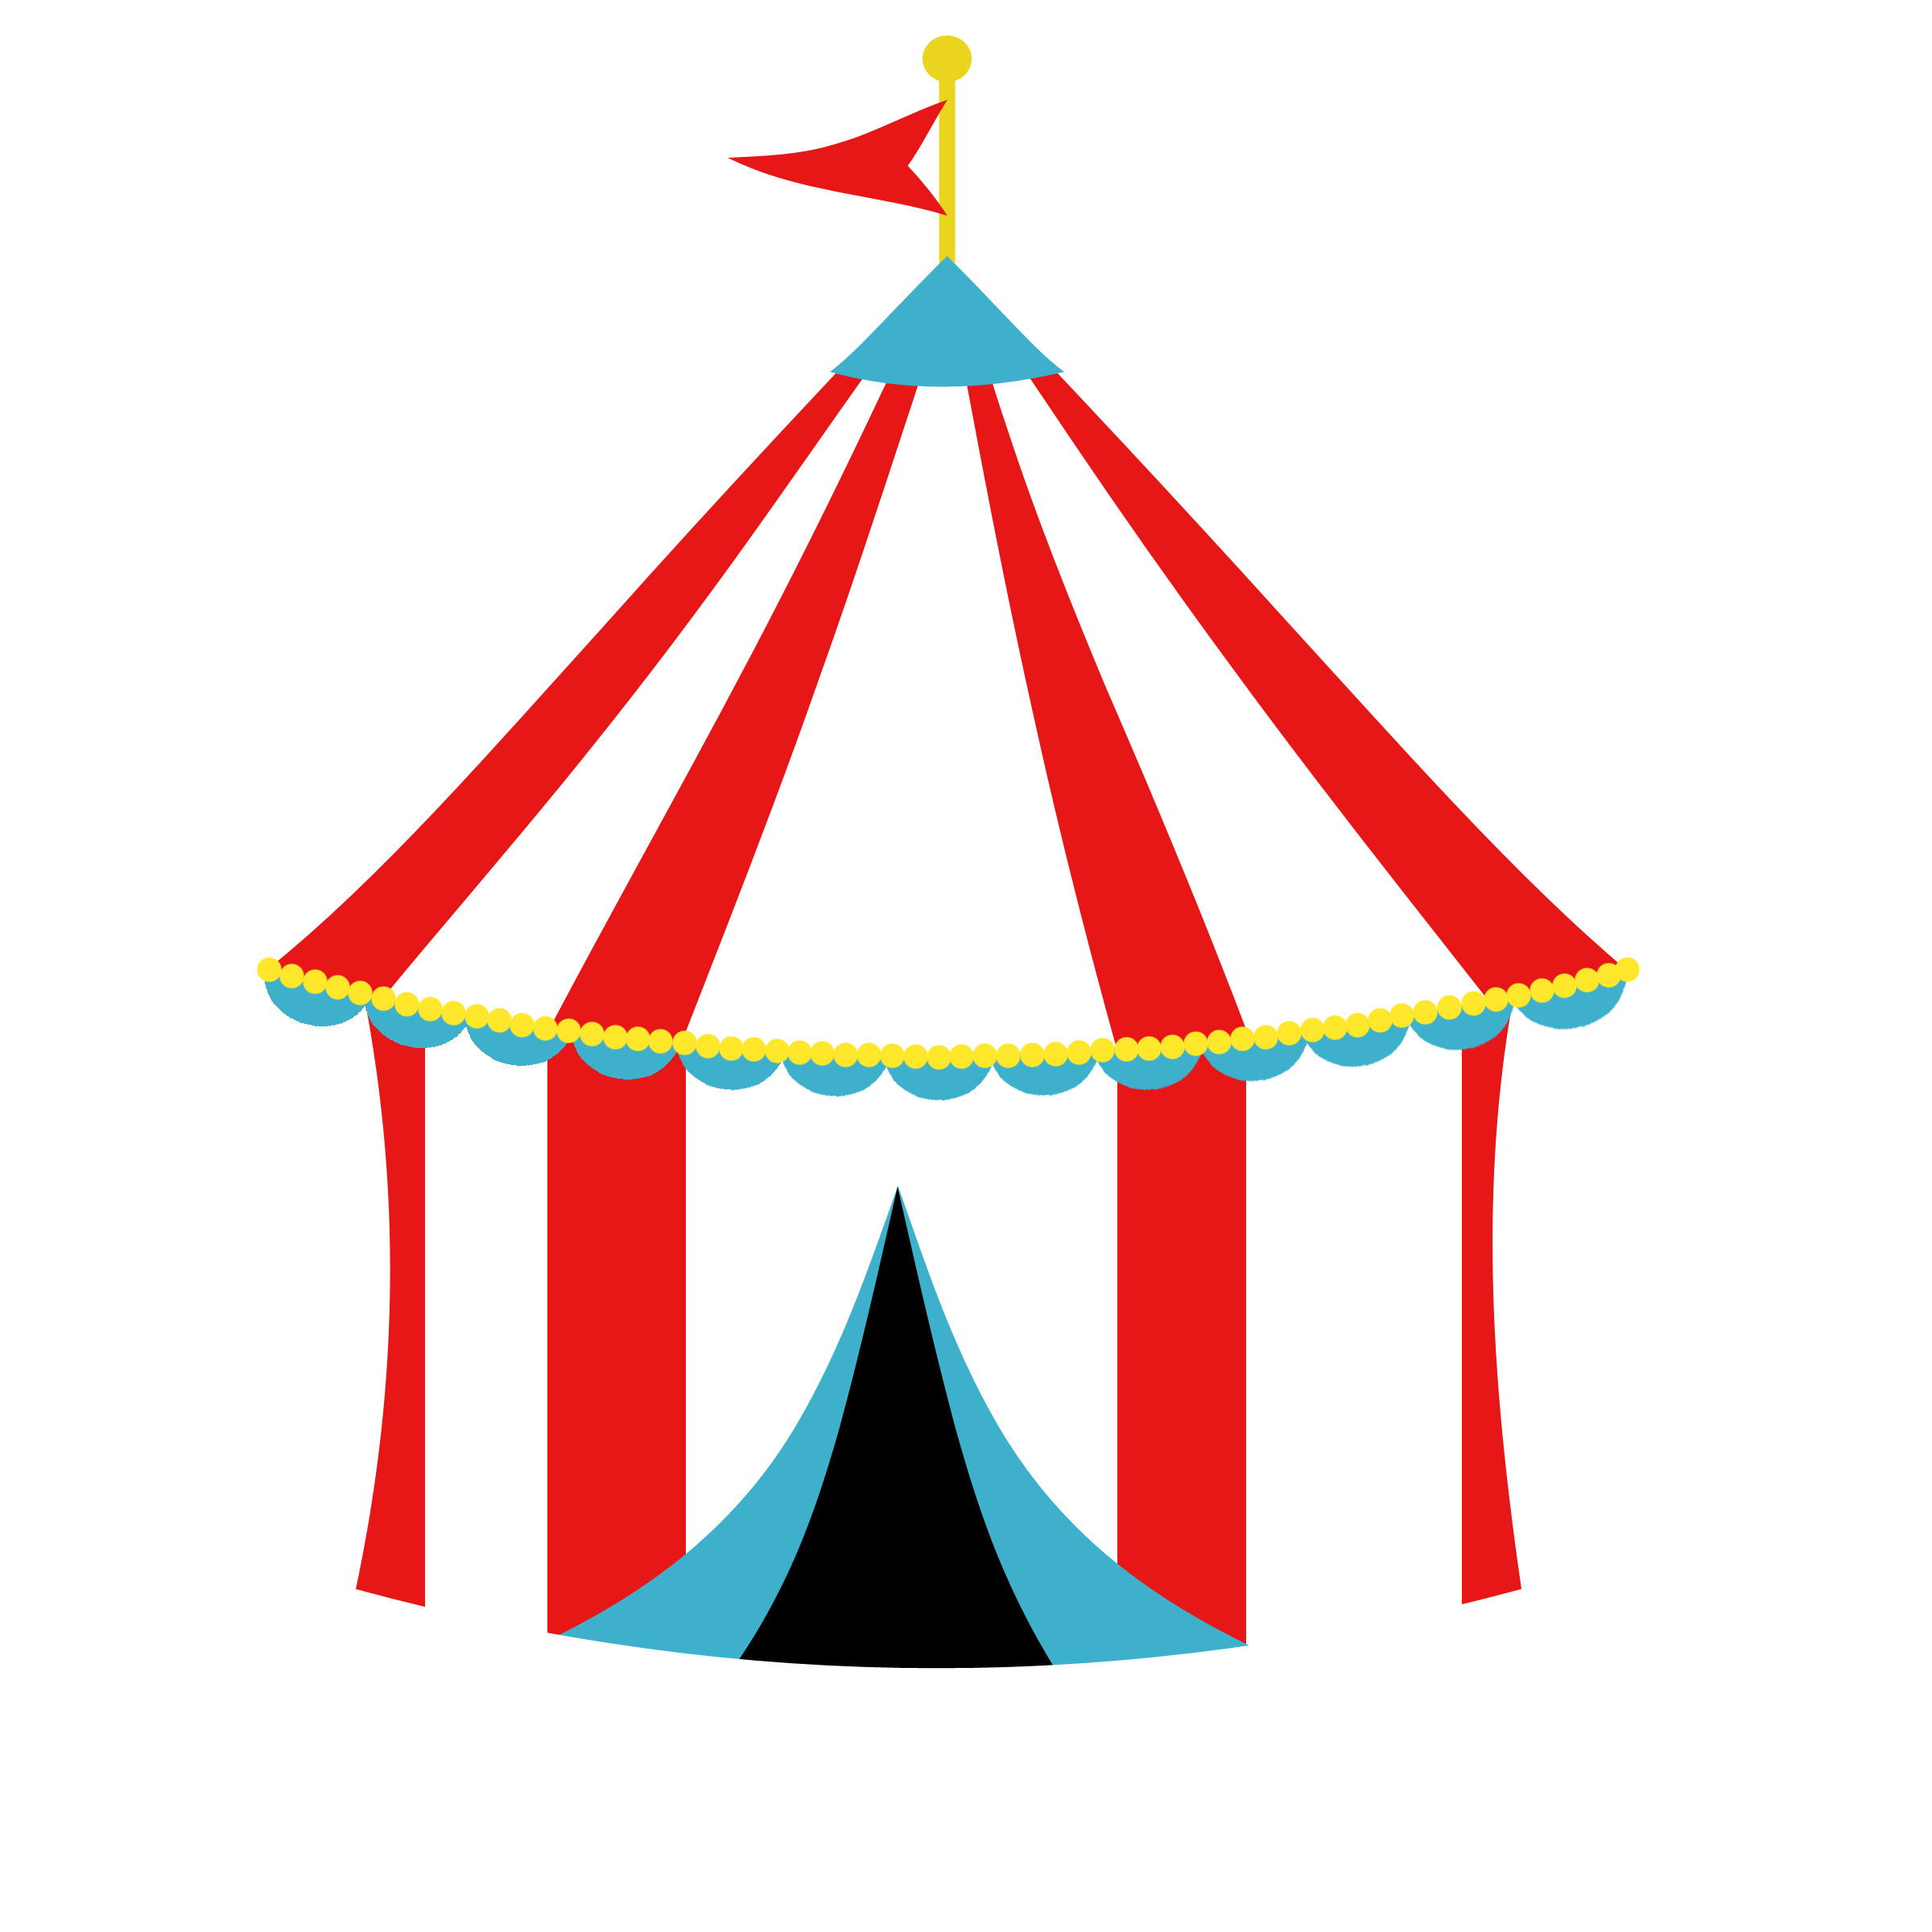 Circus clipart circus tent, Circus circus tent Transparent FREE for